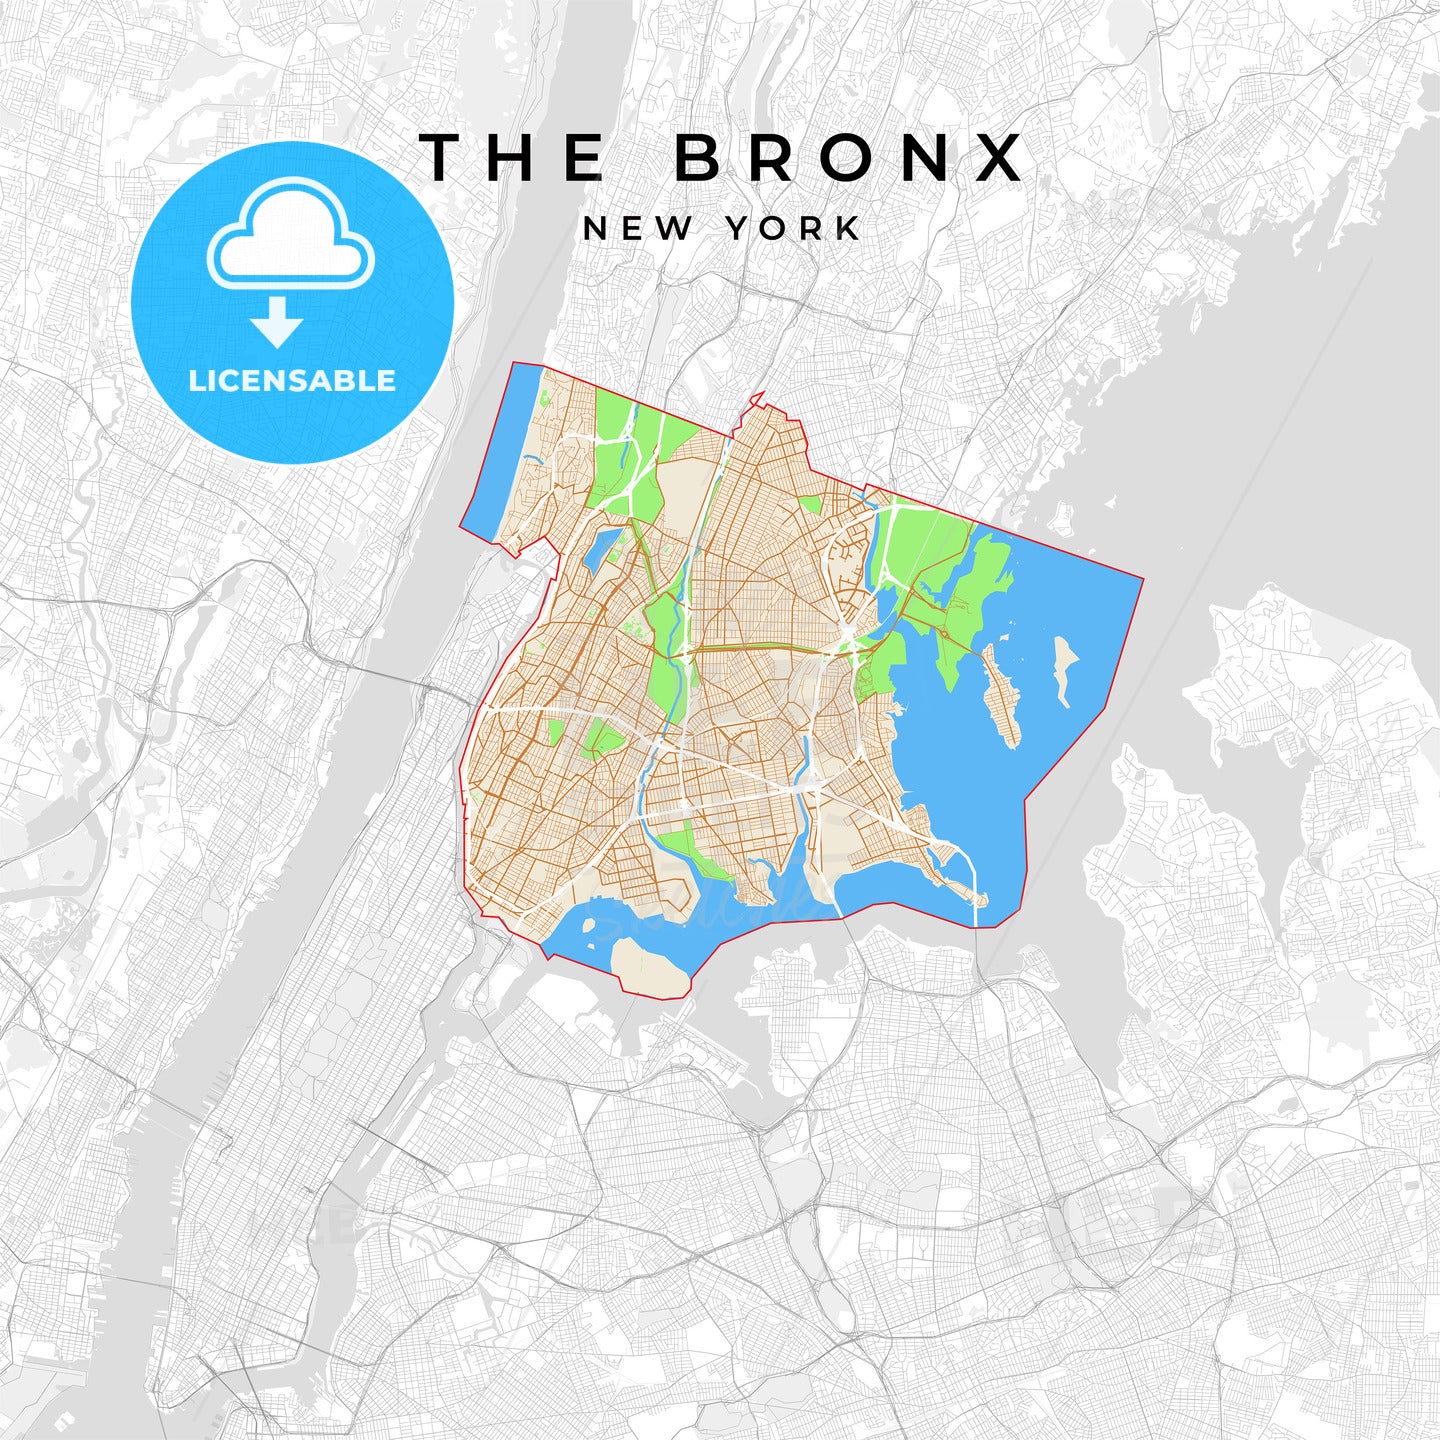 Vector map of The Bronx, New York, USA - HEBSTREITS